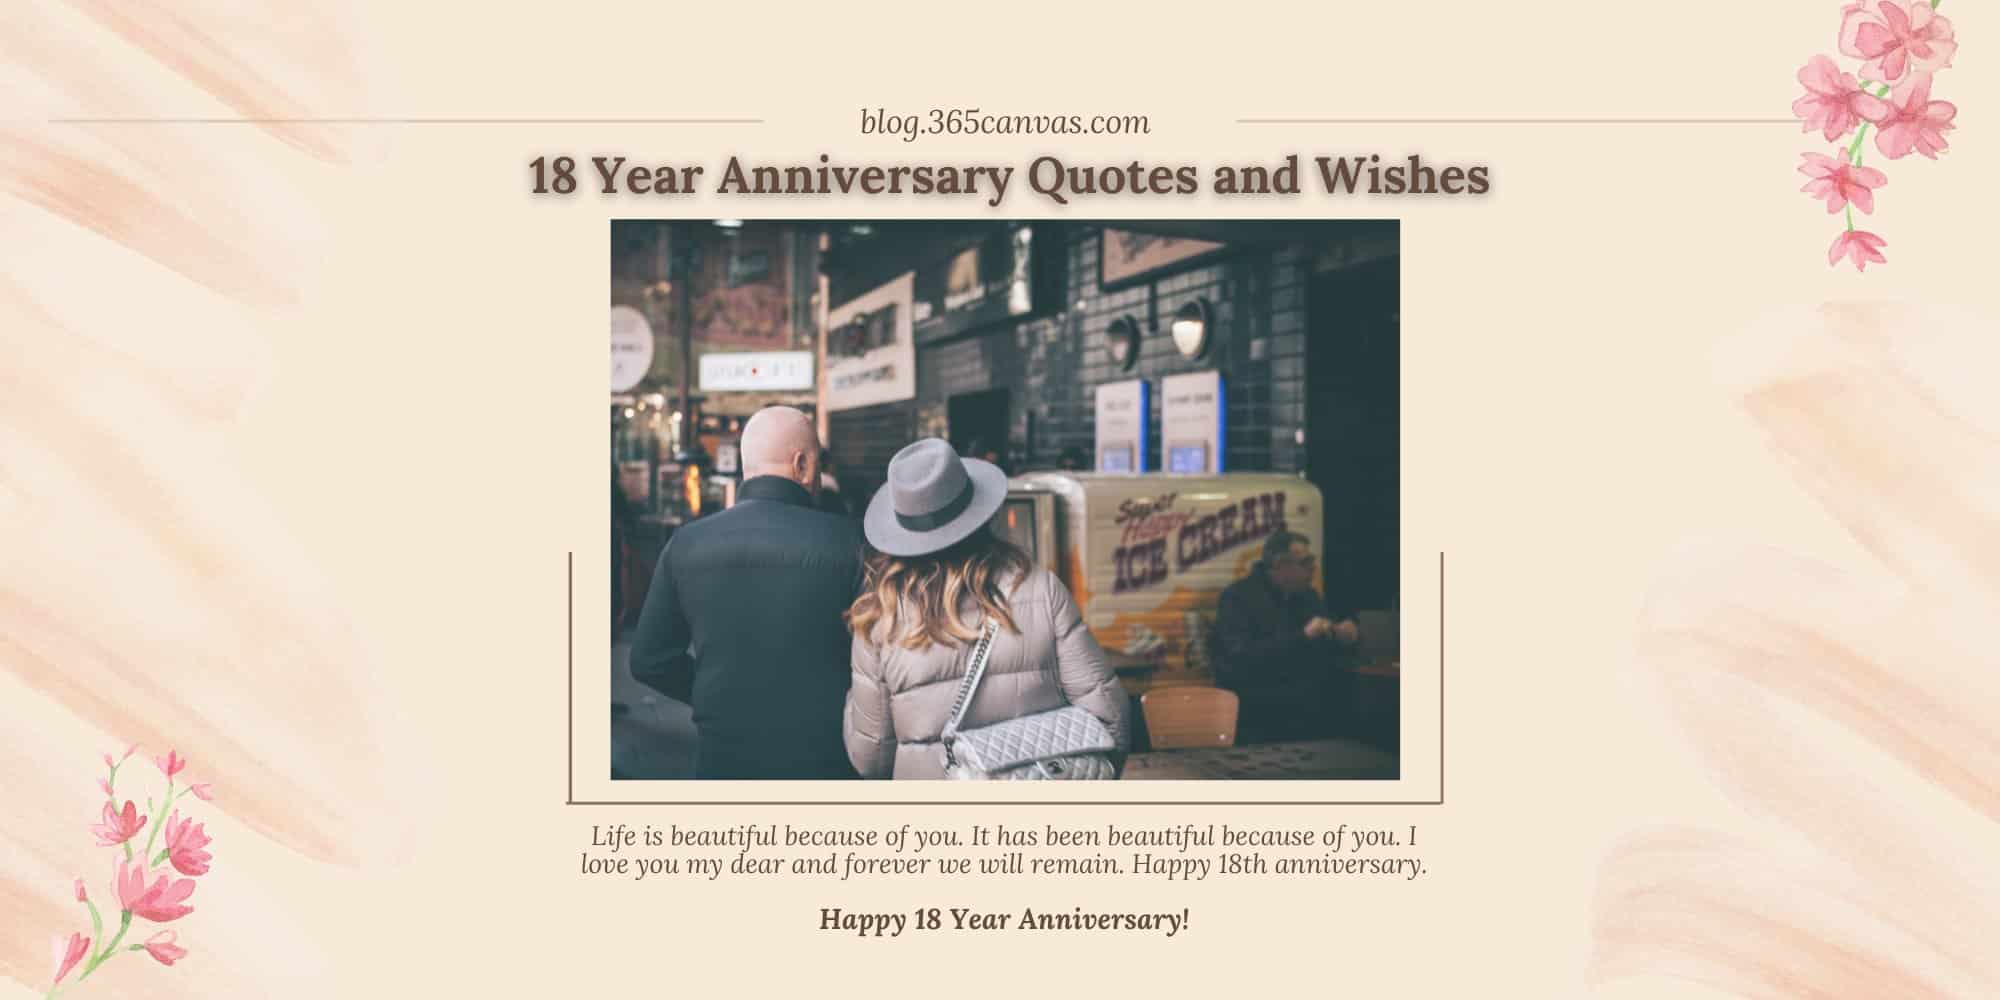 60+ Sweetest 18th Year Wedding Anniversary Quotes, Wishes